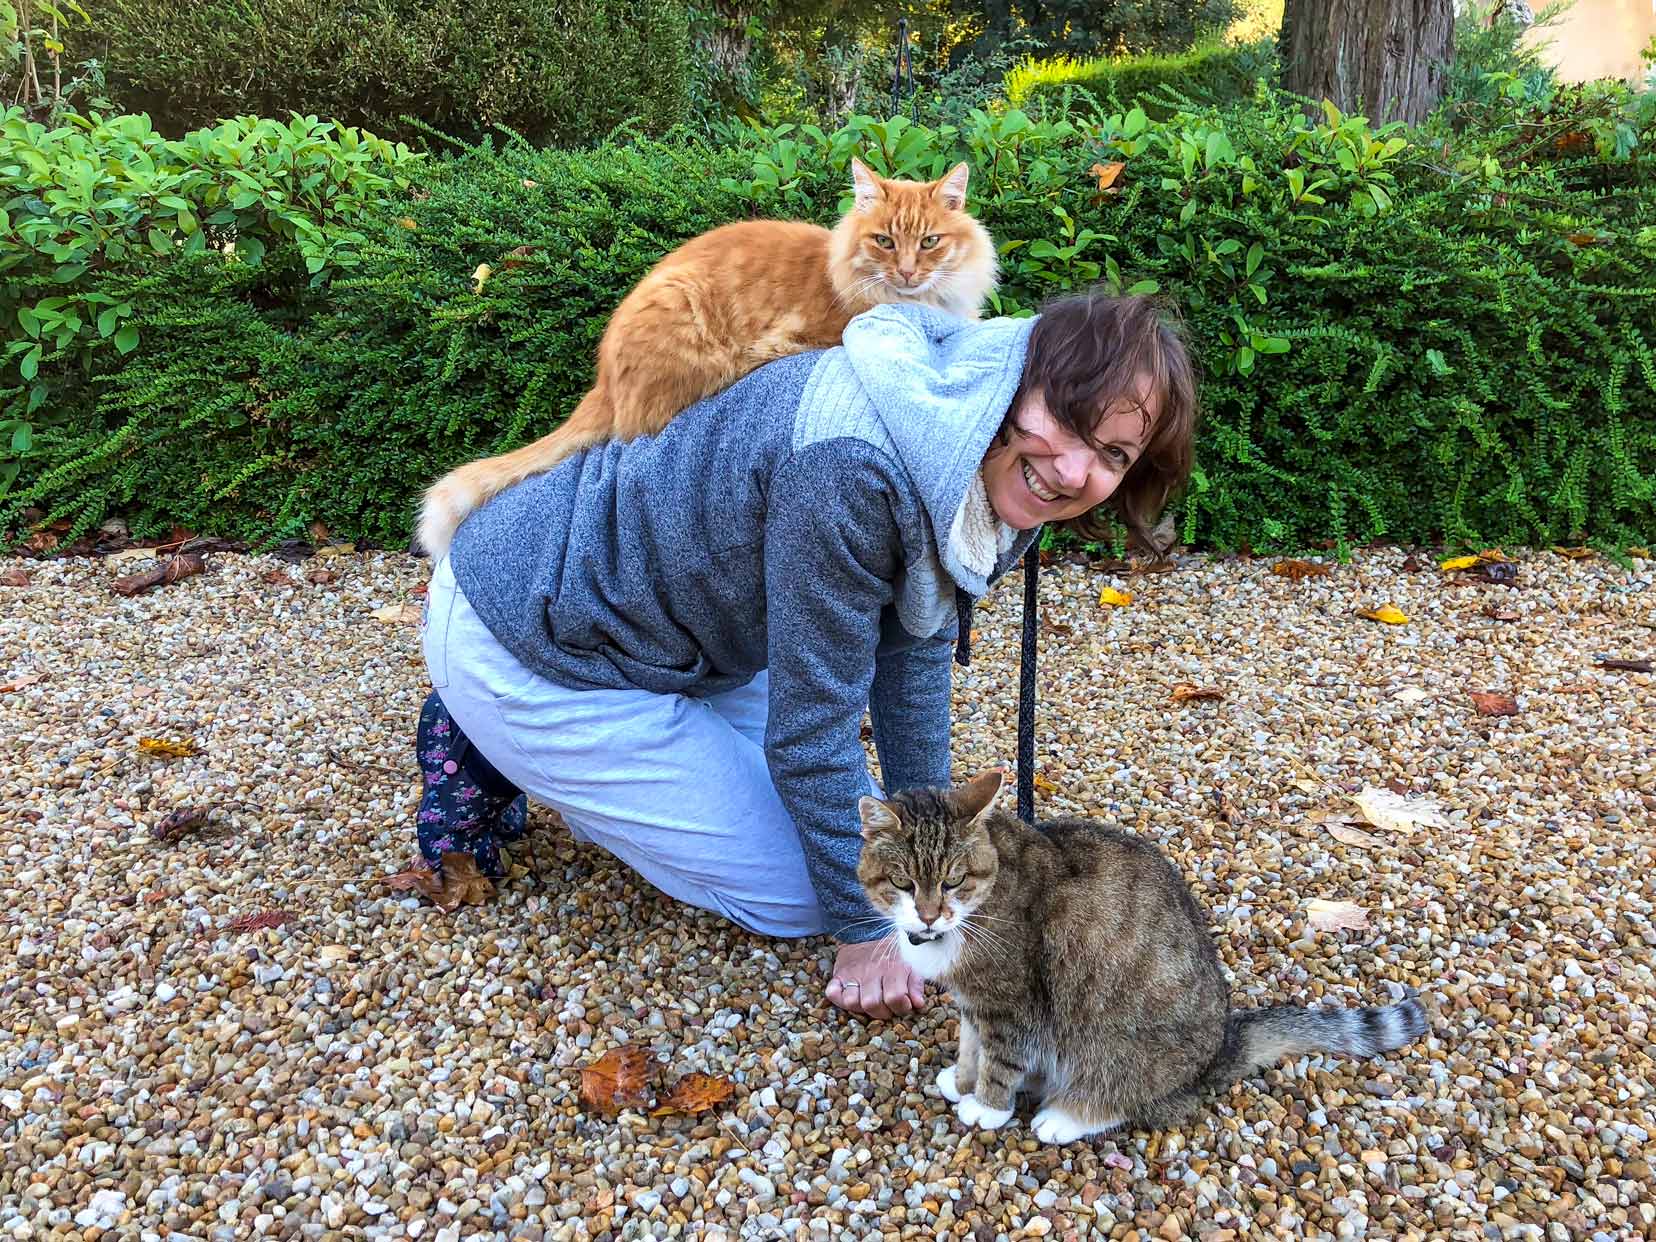 Shelley kneeling on the ground with a tabby cat beside her a dn a long haired ginger cat on her back 